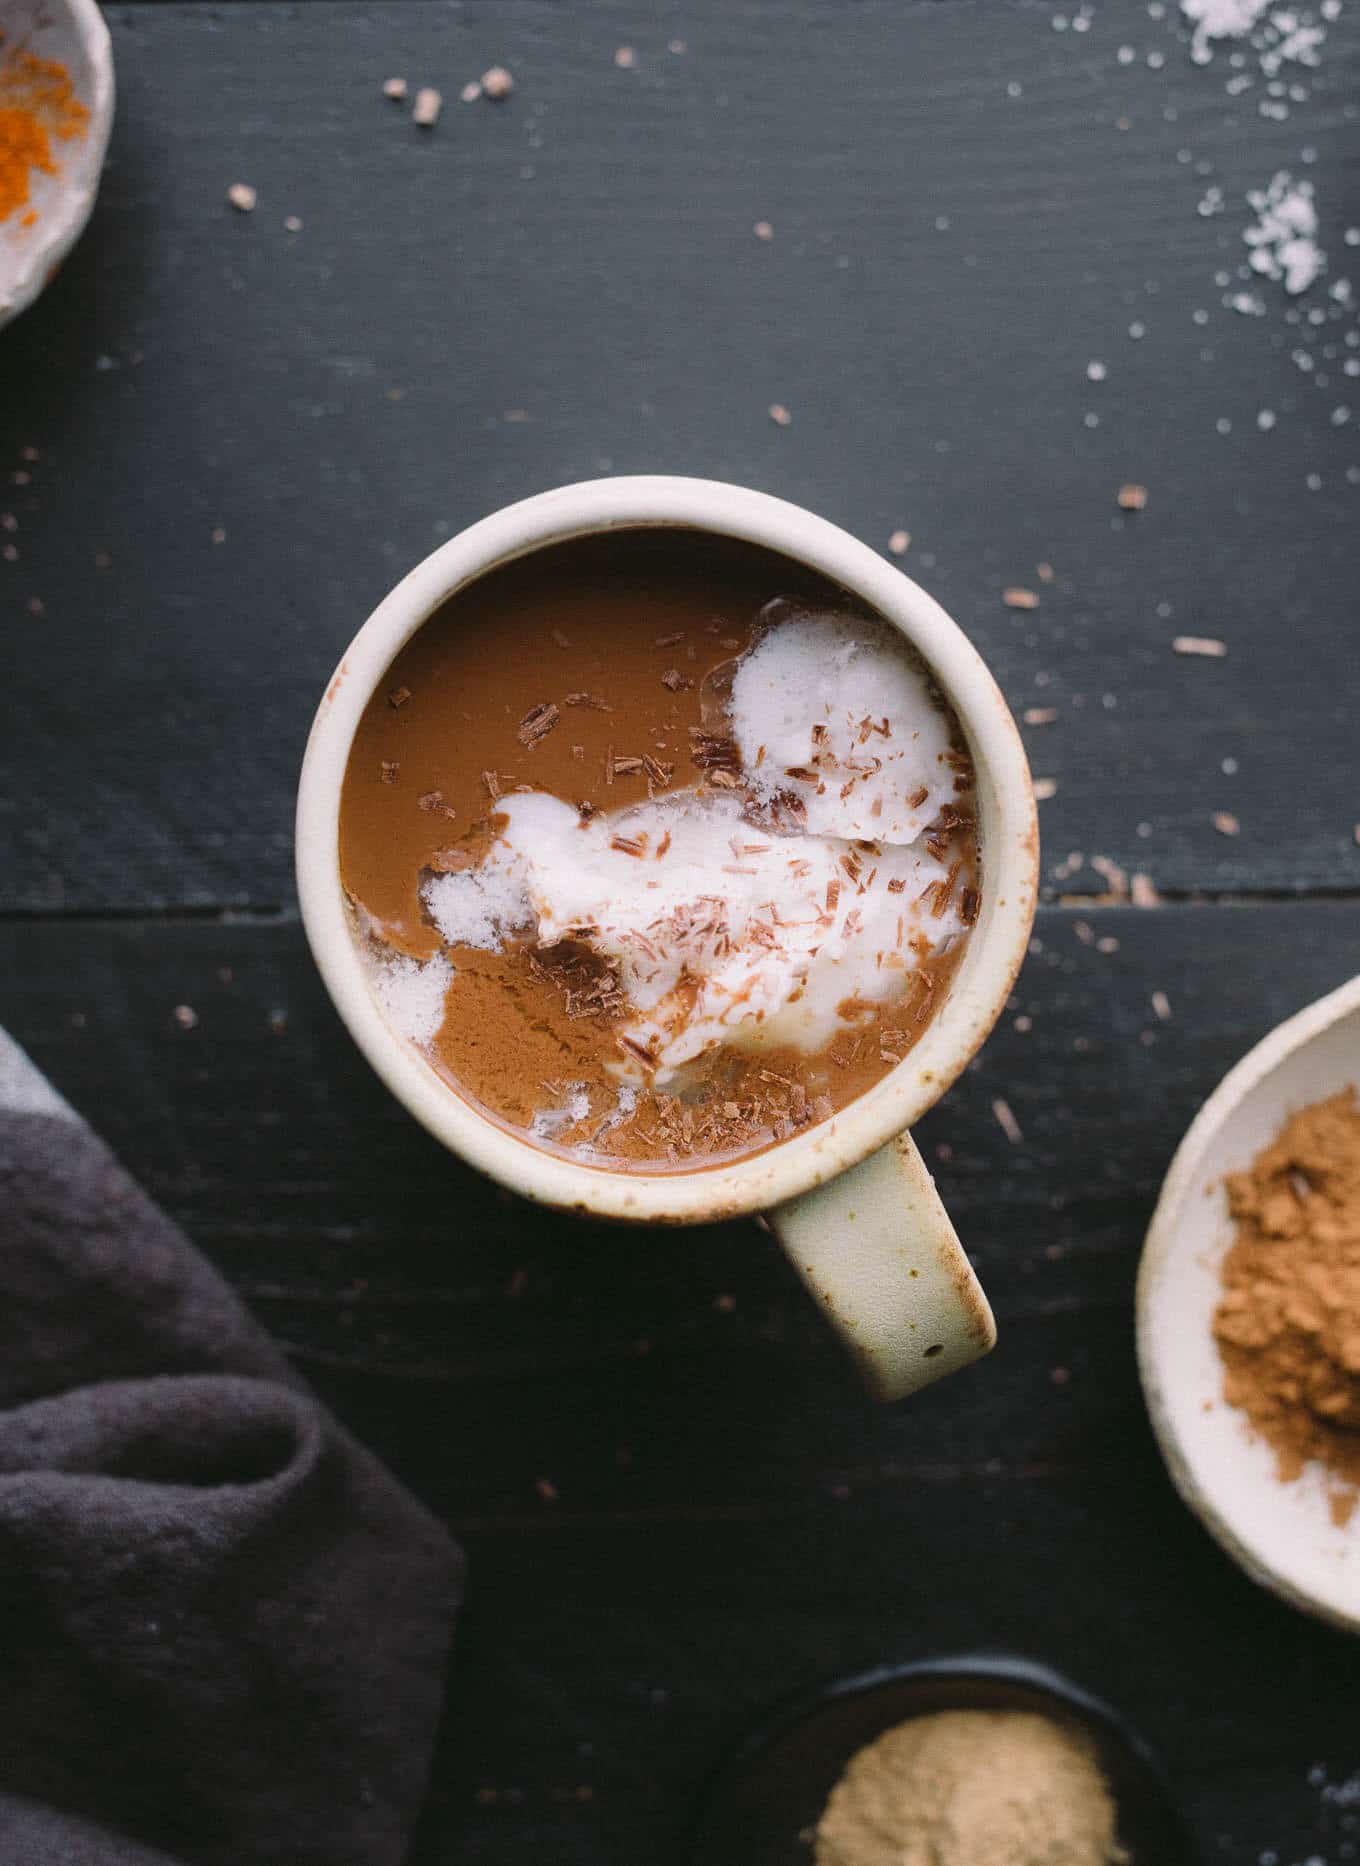 A mug of hot chocolate topped with coconut cream and chocolate shavings.